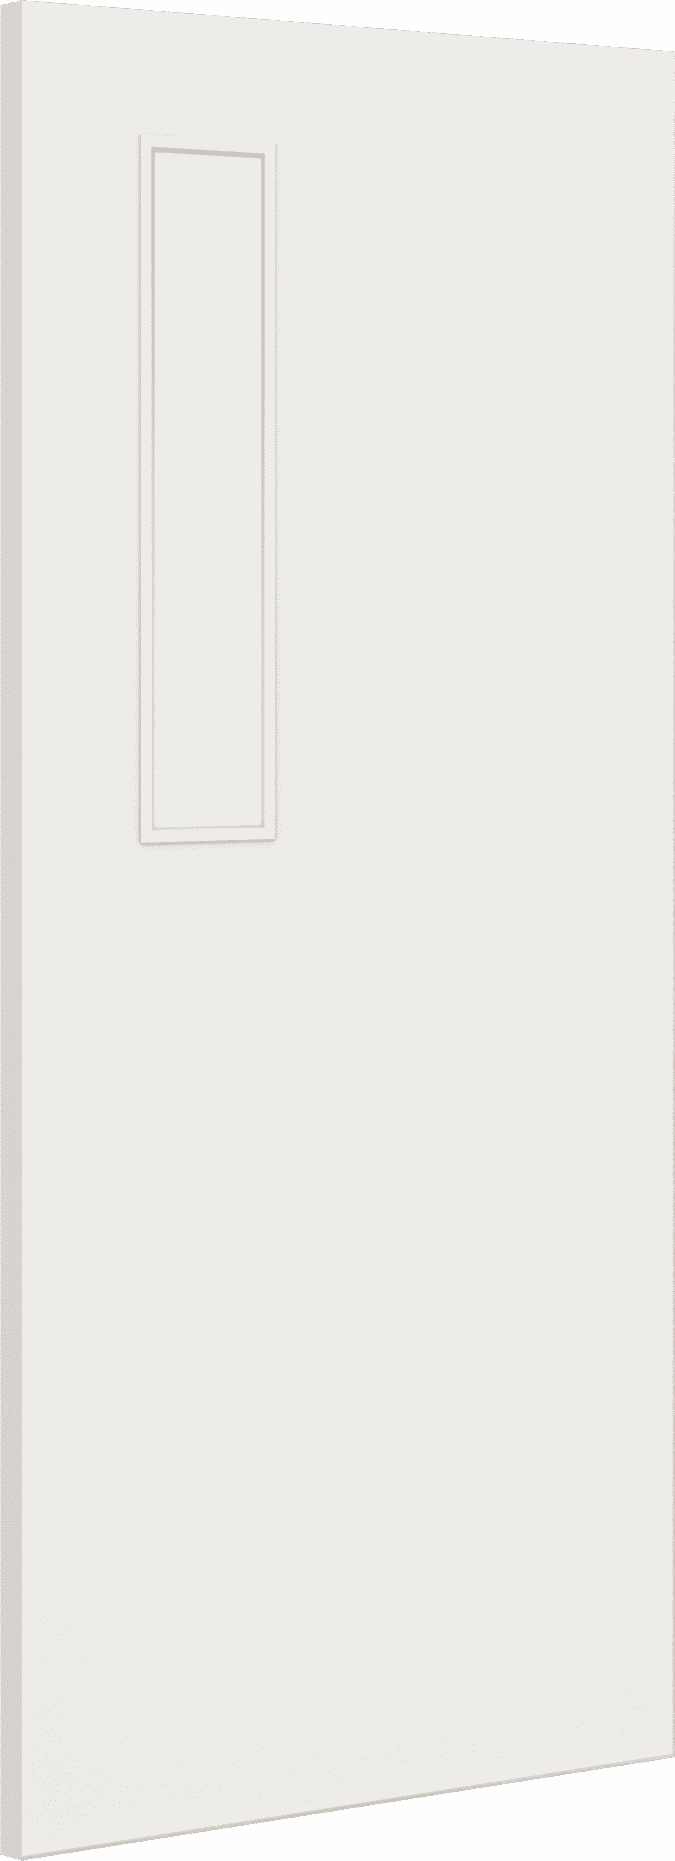 1981mm x 914mm x 44mm (36") Architectural Paint Grade White 08 Clear Glazed Fire Door Blank